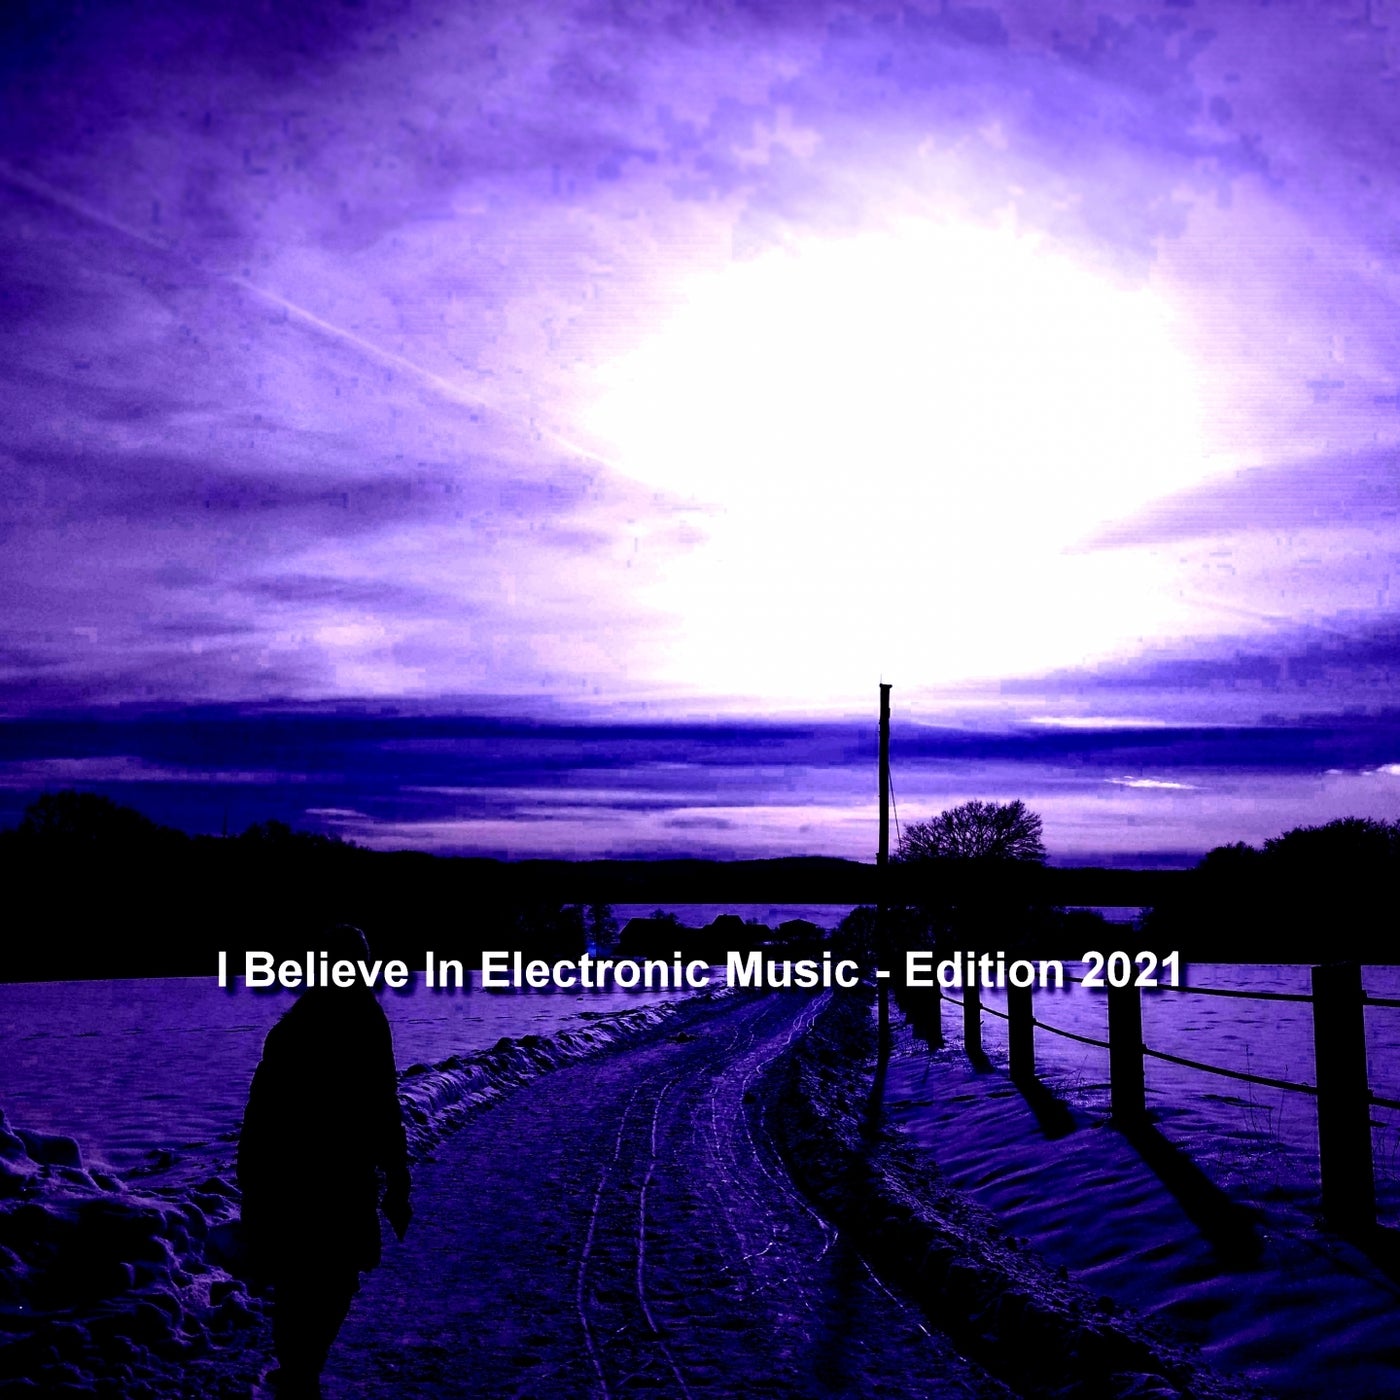 I Believe In Electronic Music - Edition 2021